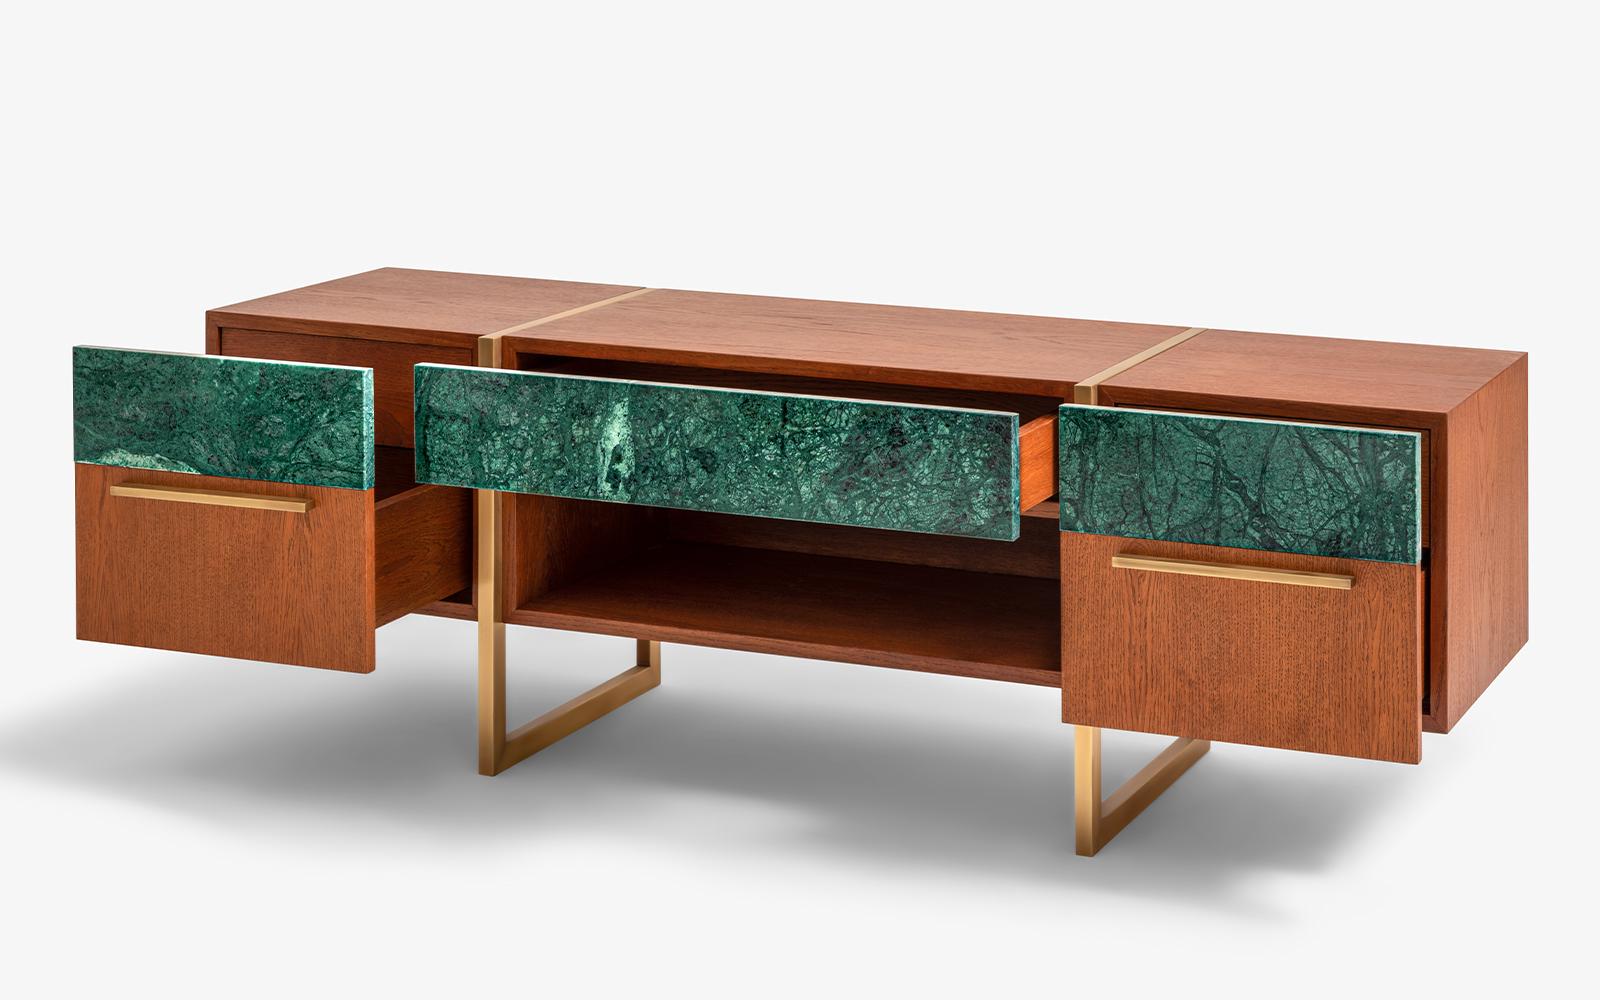 FAMED TV UNIT is a stylish piece of furniture that combines natural elements like oak veneer, rainforest marble, and aged brass to create a visually appealing and elegant design. The oak veneer provides a warm and natural feel, while the rainforest